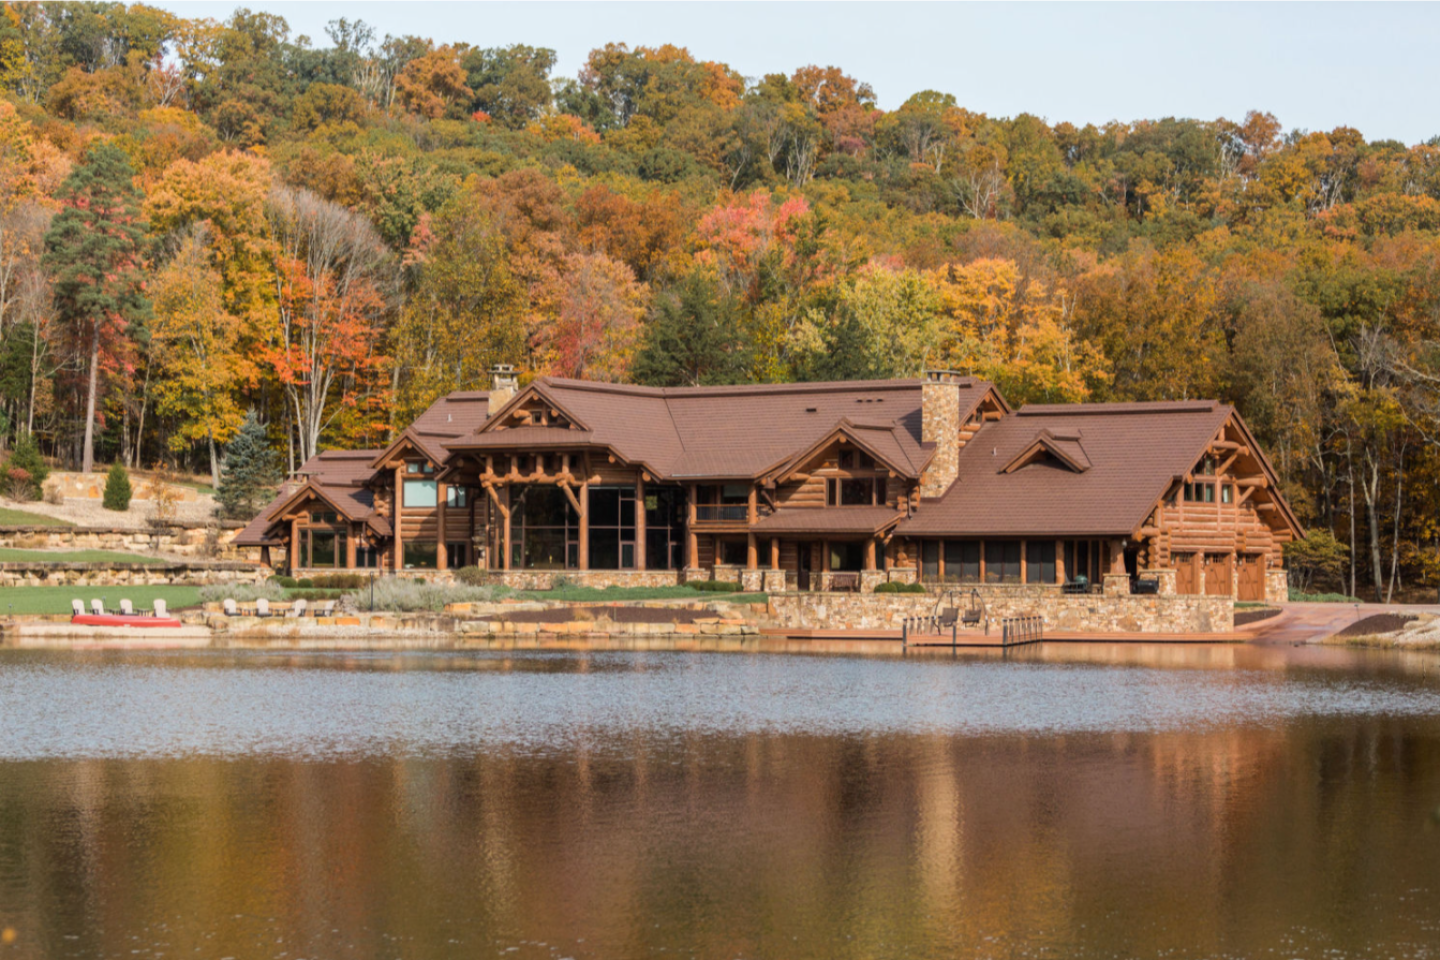 The 20,000-square-foot cabin.